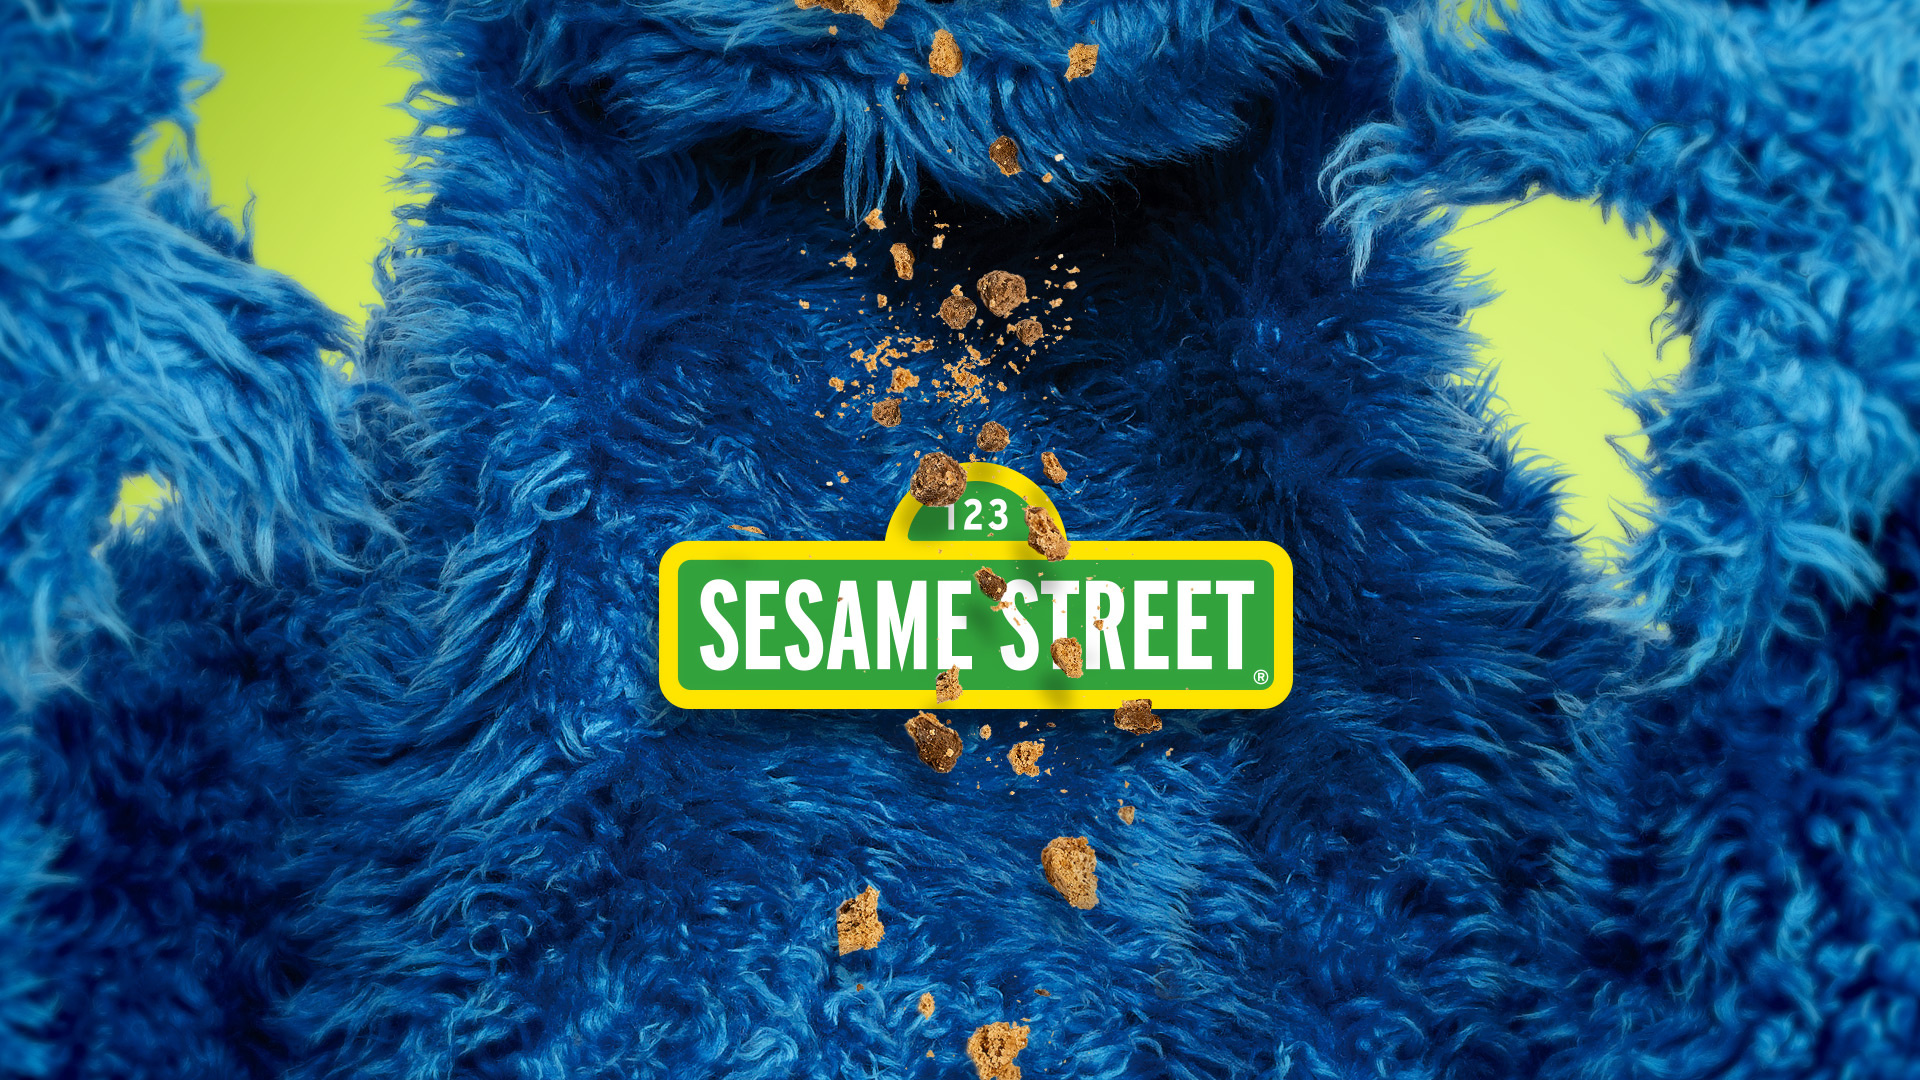 Sesame Street promo toolkit design with Cookie Monster